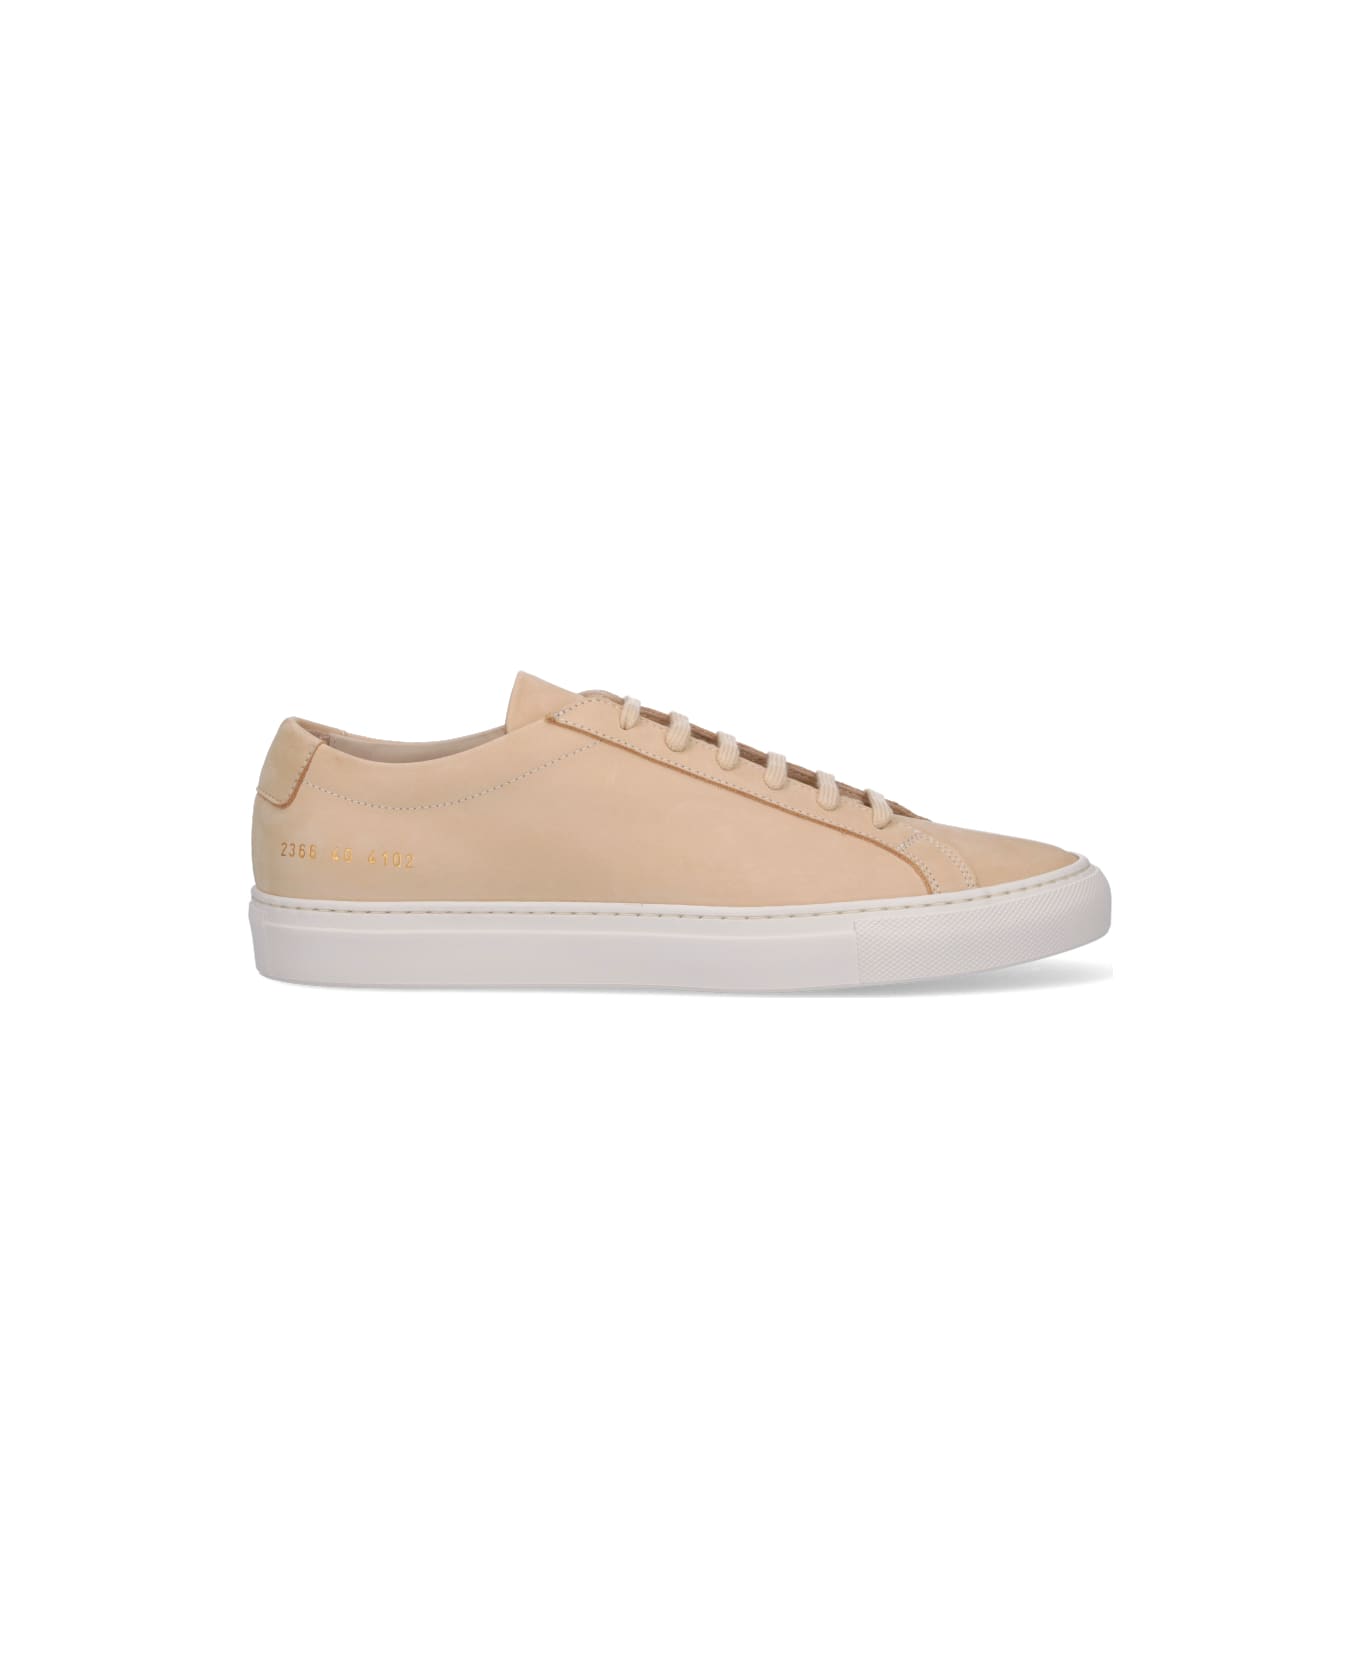 Common Projects Logo Low Sneakers - Beige スニーカー